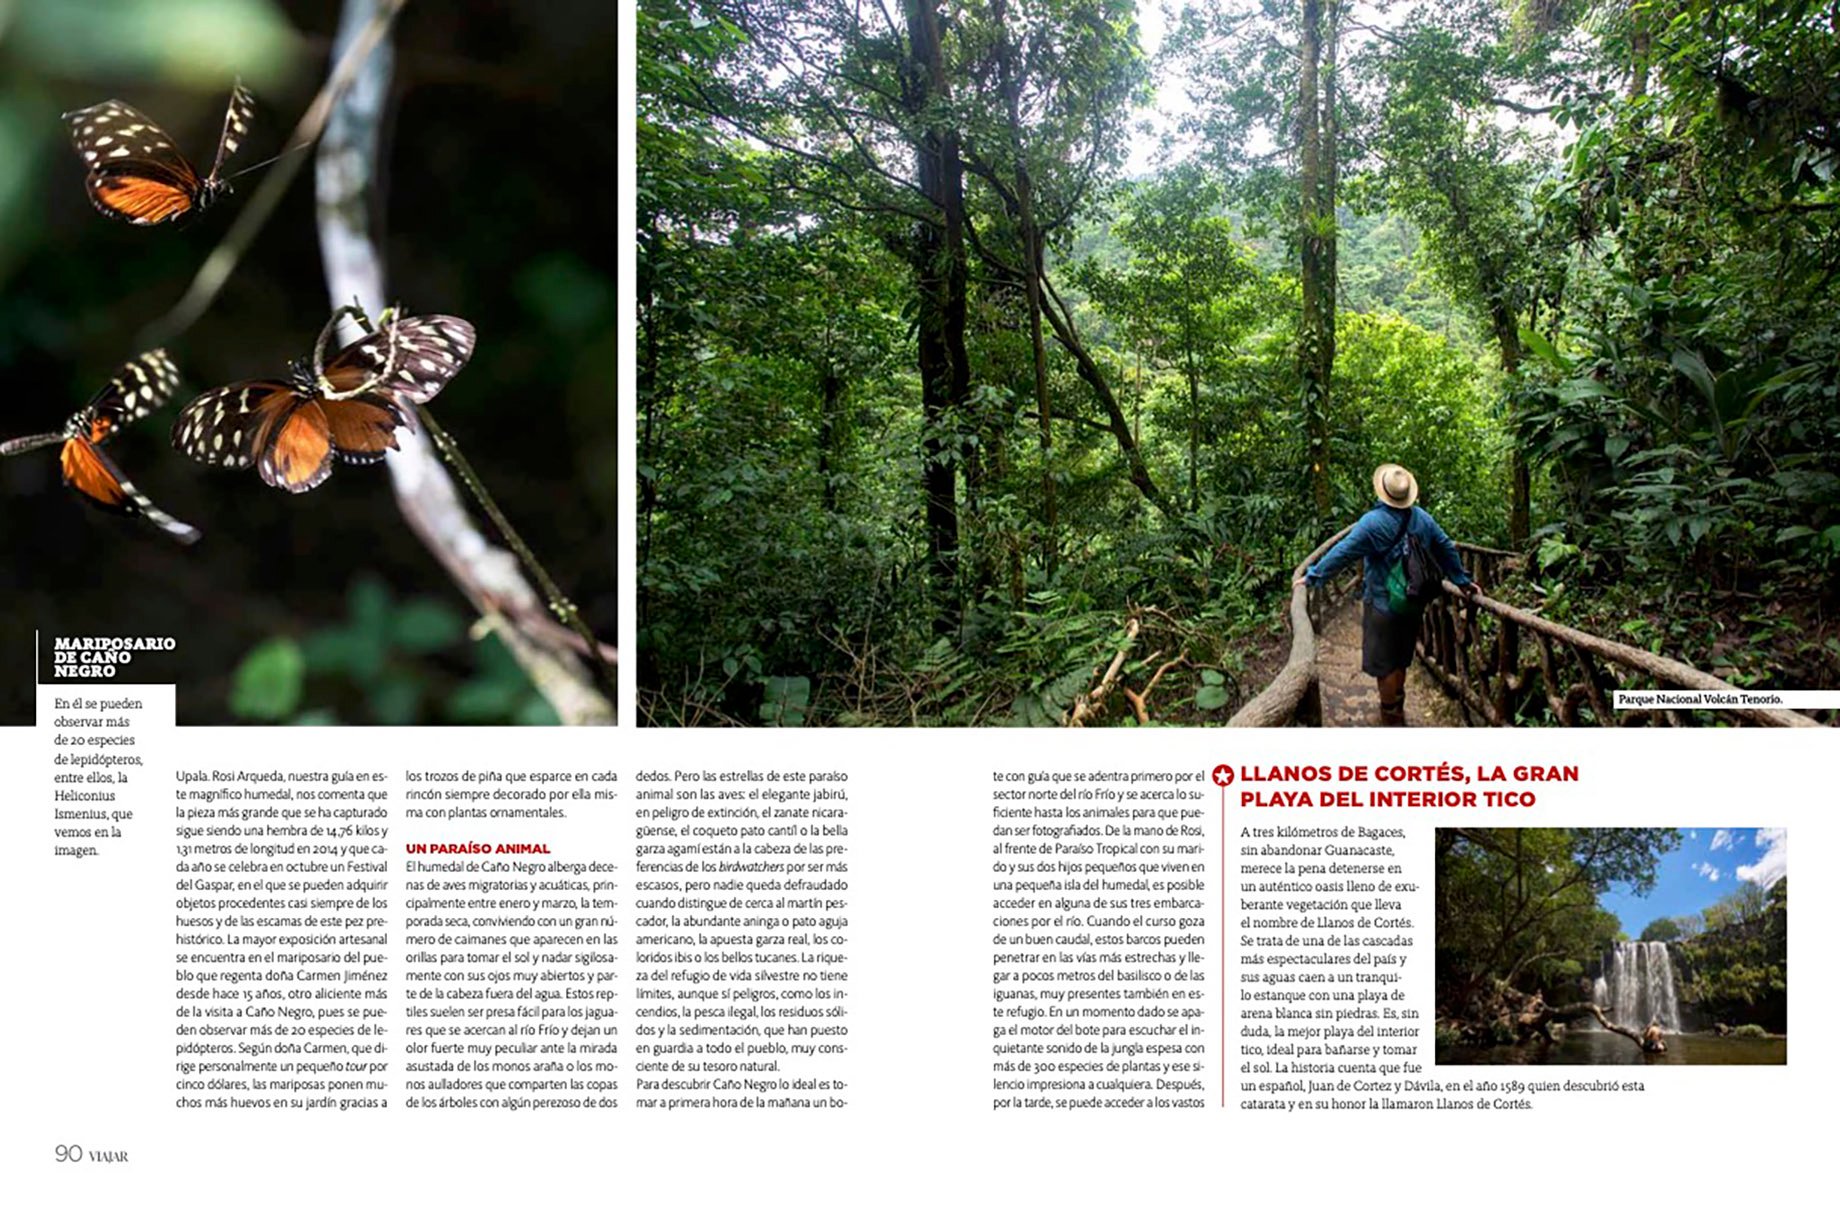 Tear sheet of Viajar magazine feature on Costa Rica shot by Cristina Candel 